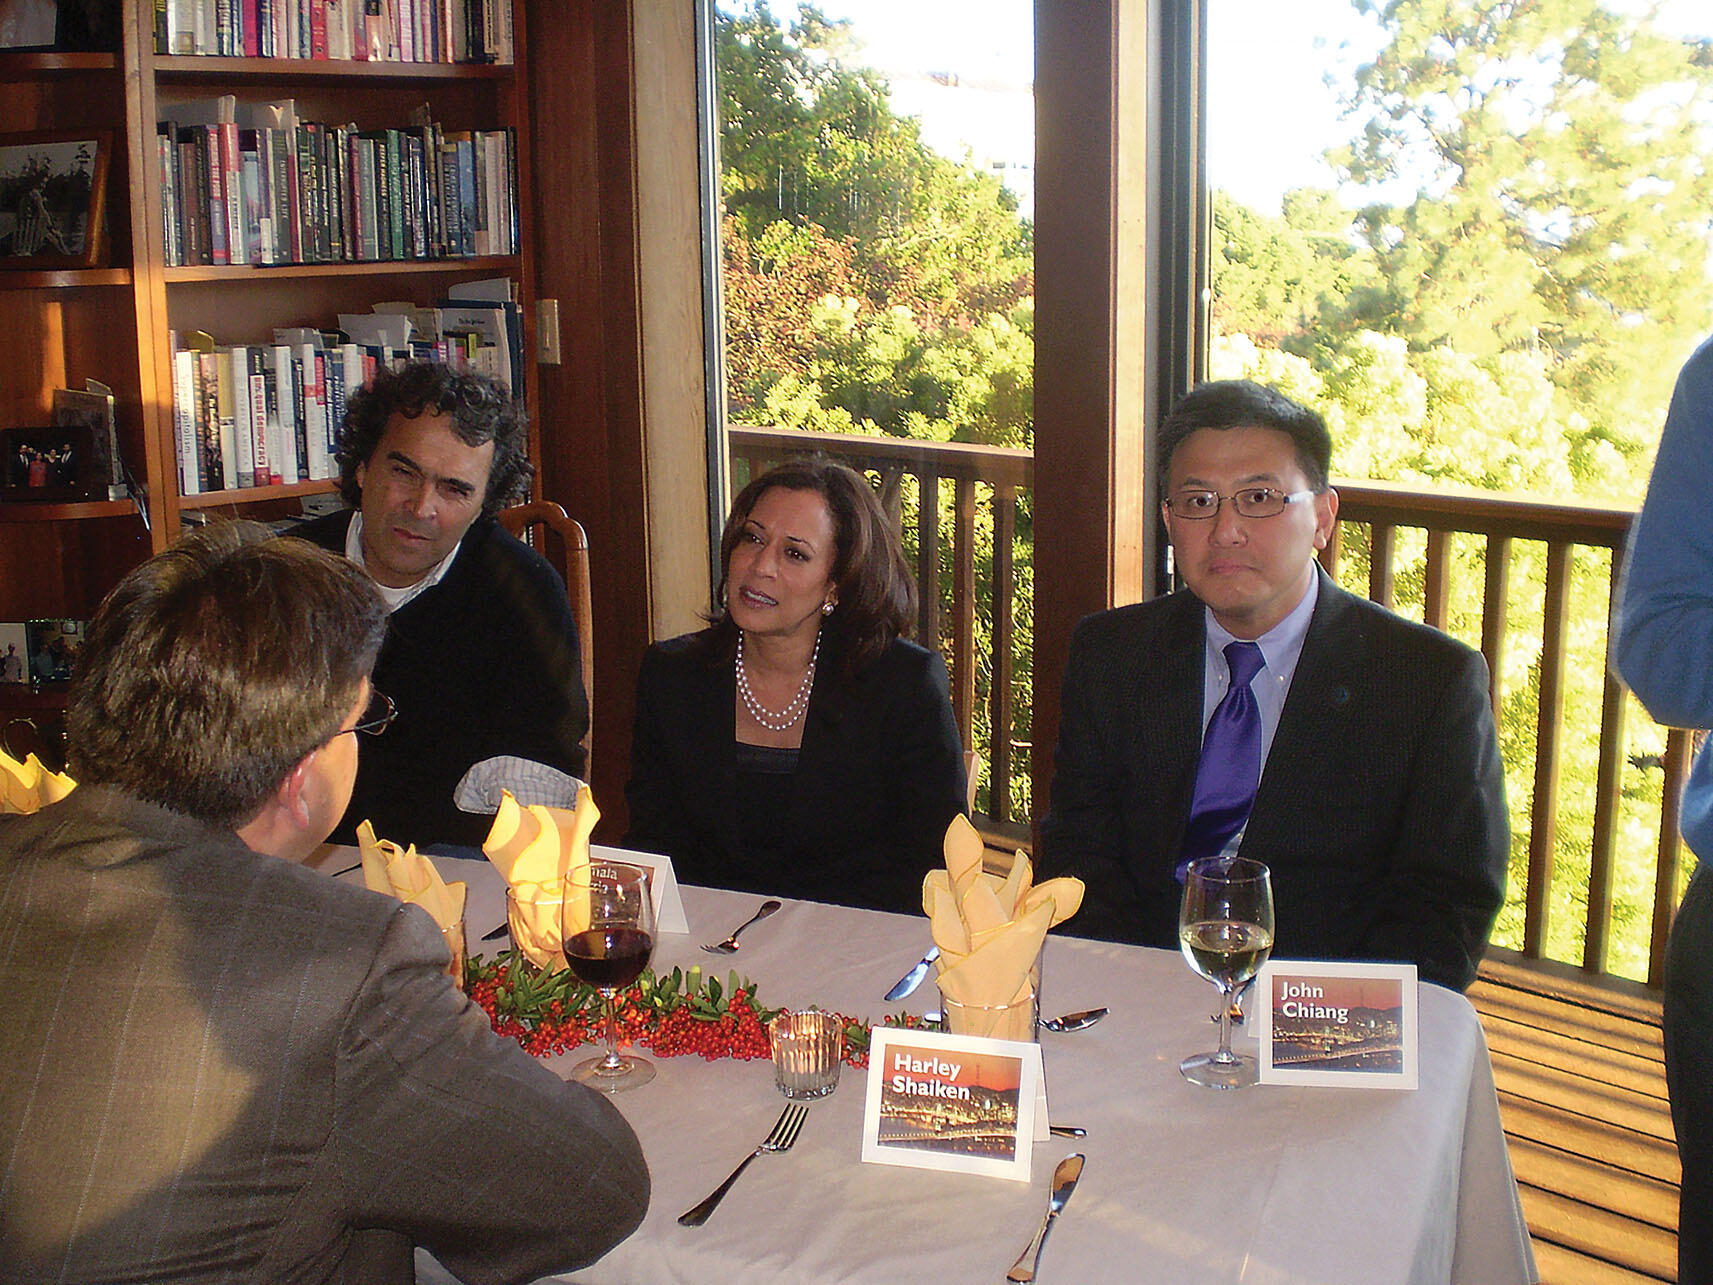  Sergio Fajardo, Kamala Harris, and John Chiang speak over dinner with Pete Gallego (back to camera). (Photo by Meredith Perry.)